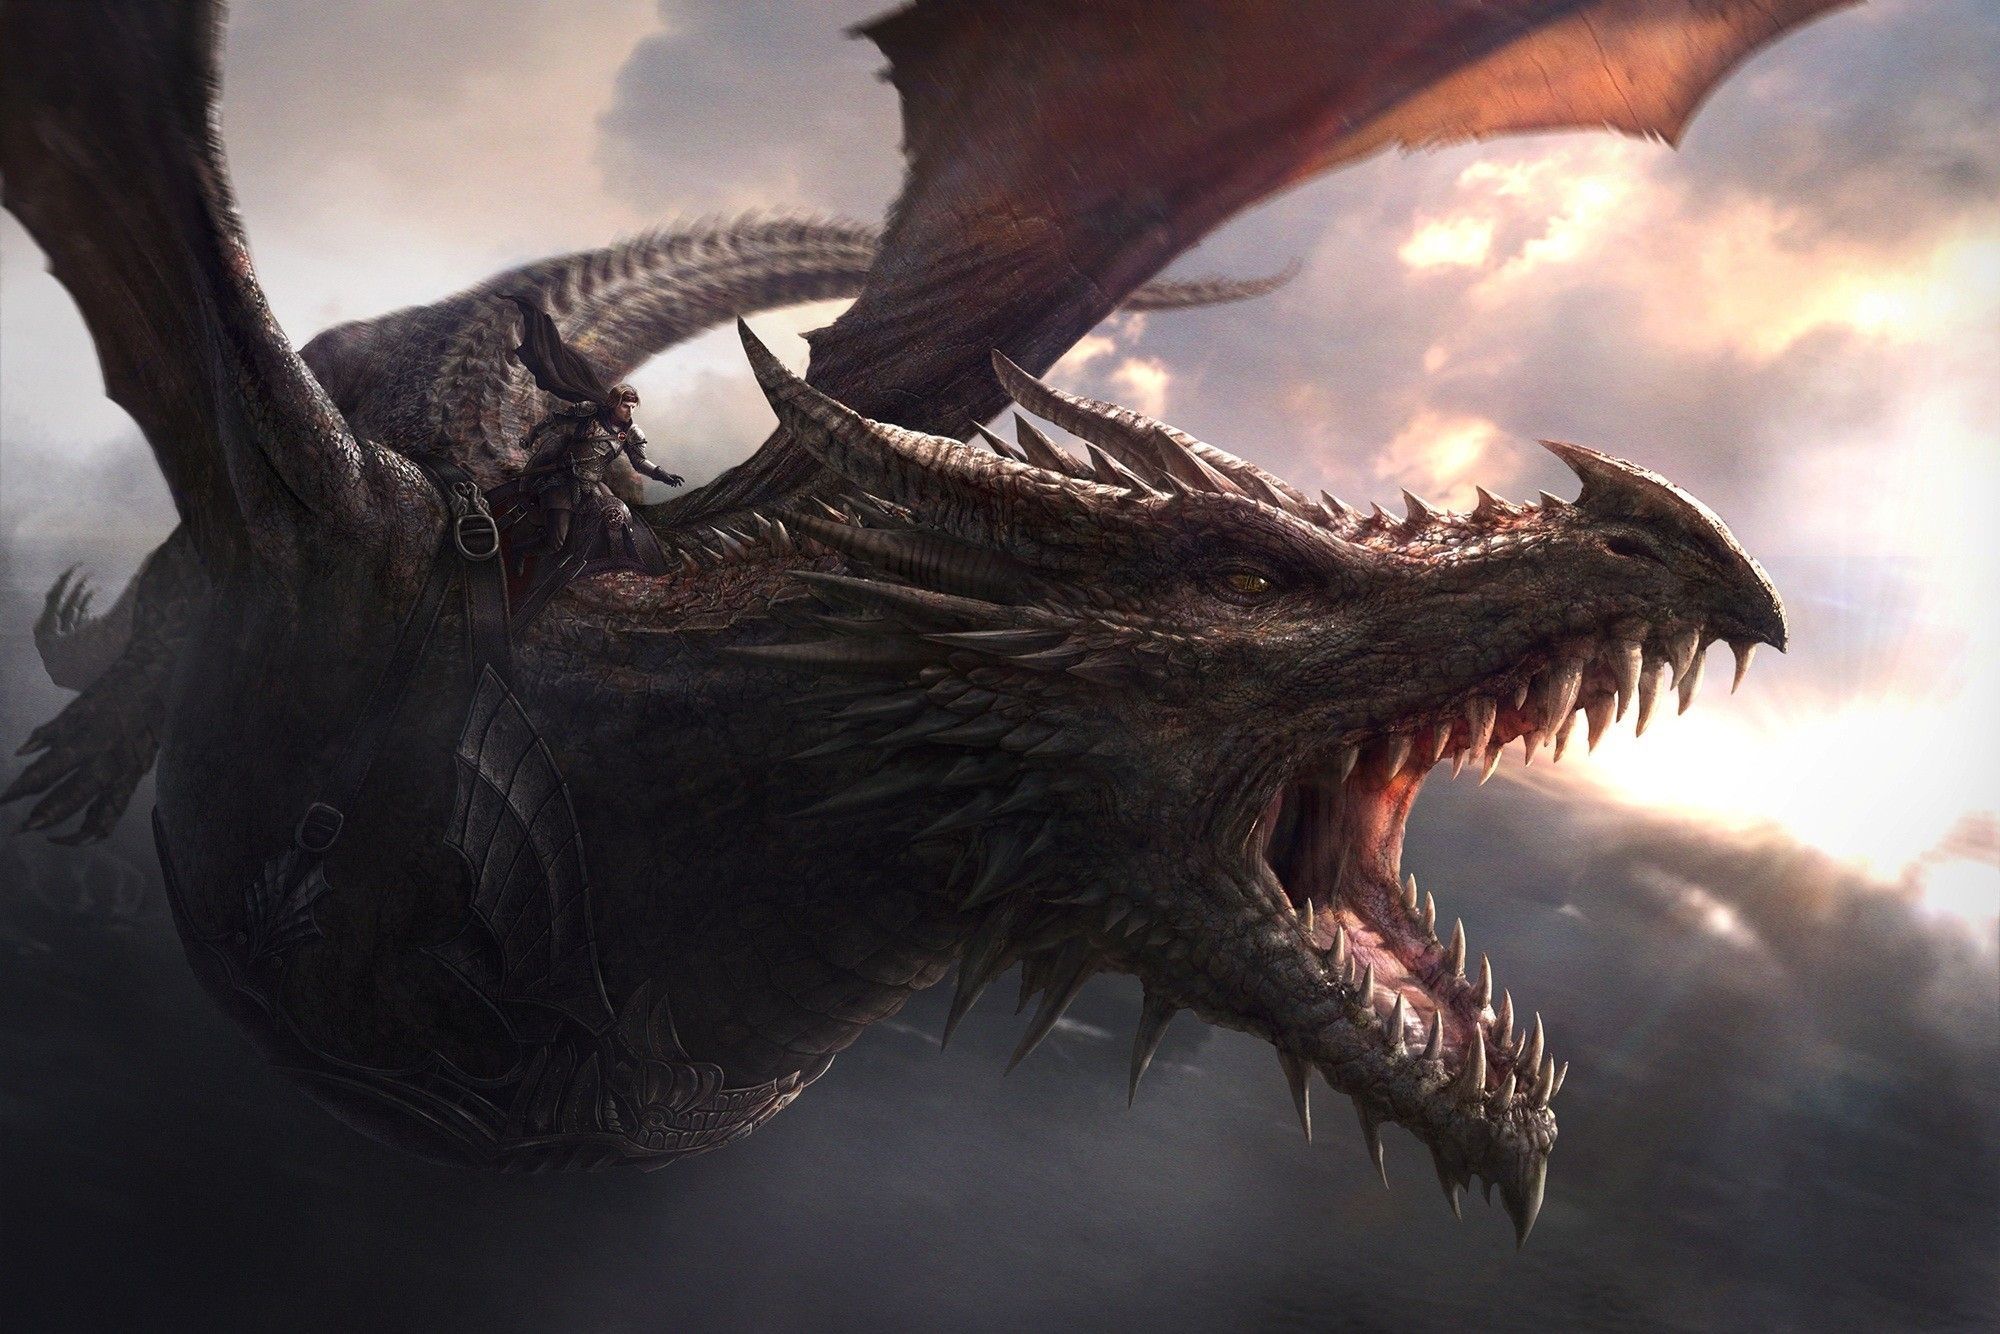 Game of Thrones Dragons Wallpaper Free Game of Thrones Dragons Background. Dragon games, Game of thrones dragons, Balerion the black dread